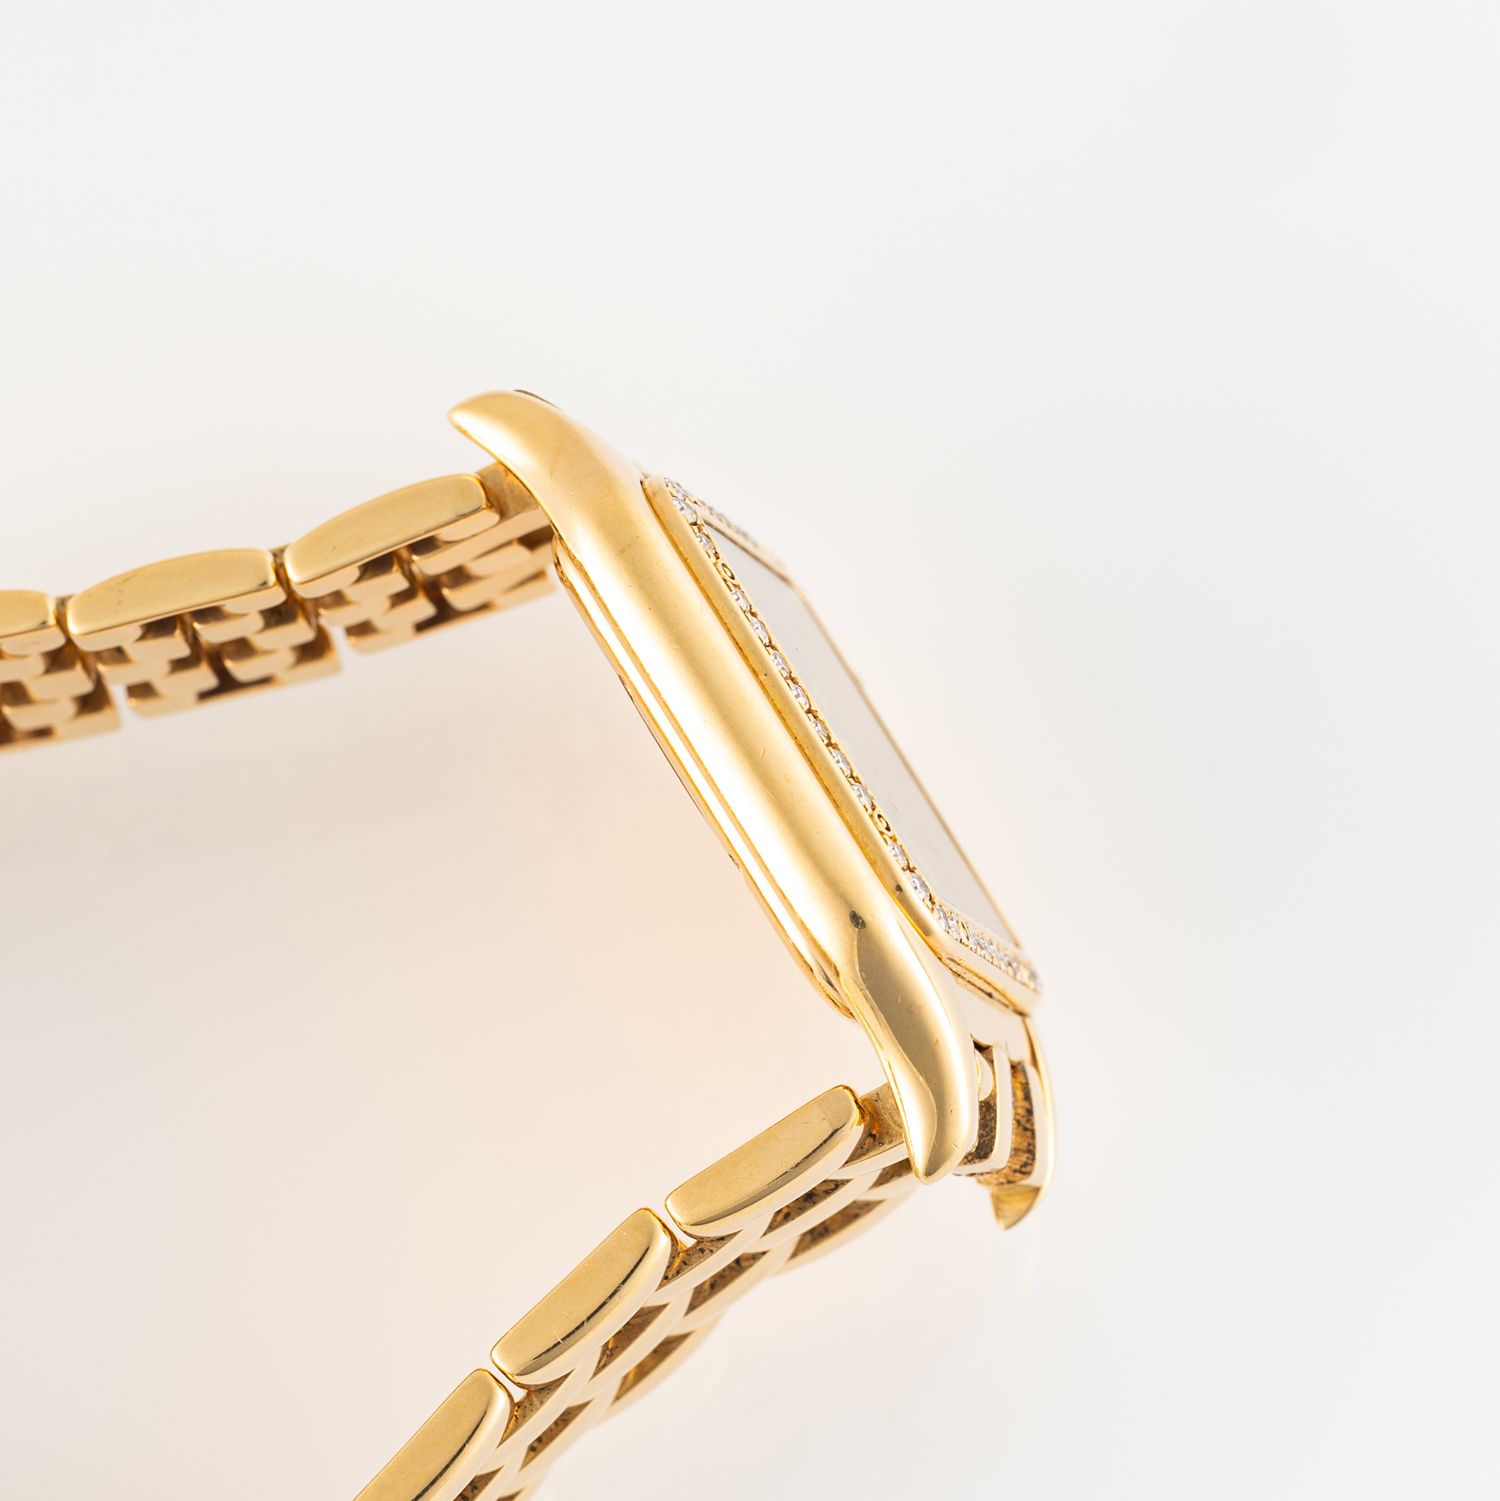 A RARE GENTLEMAN'S SIZE 18K SOLID GOLD & DIAMOND CARTIER PANTHERE BRACELET WATCH CIRCA 1990, REF. - Image 6 of 9